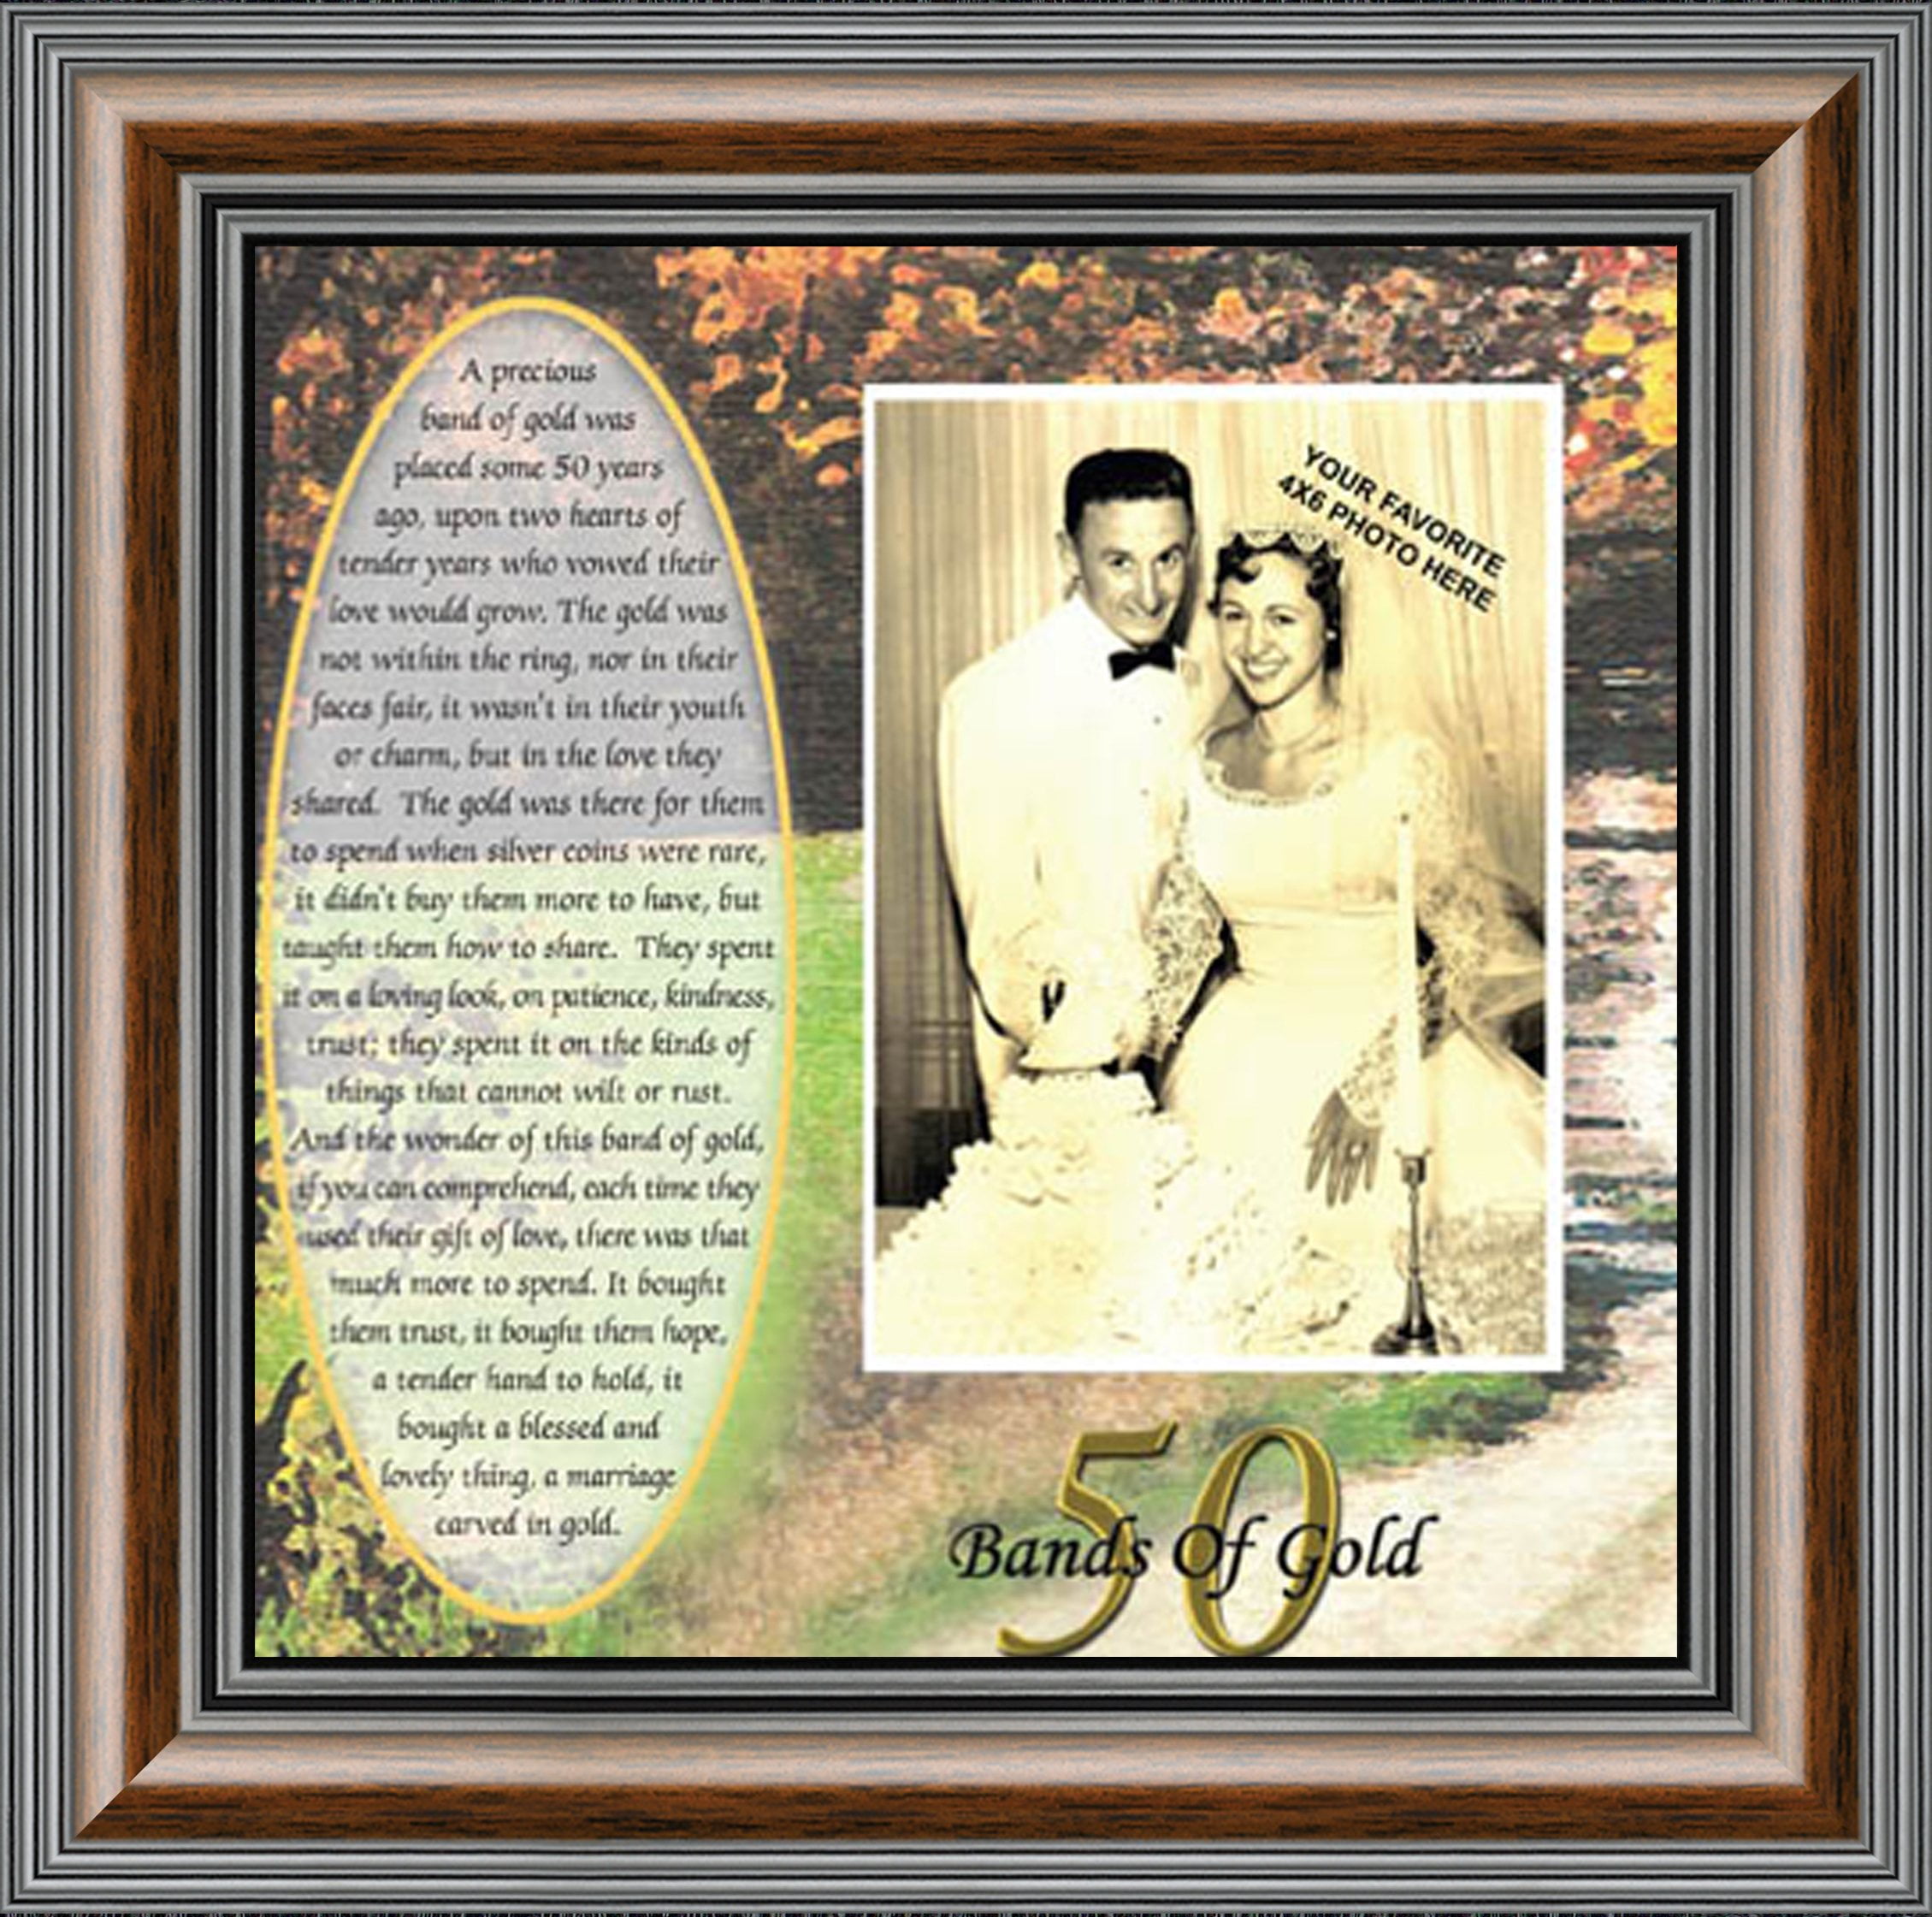 50th Wedding Anniversary Gifts For Parents Or Couples 50th Anniversary Decorations For Party Golden Anniversary 50 Year Gifts Gift To Add To A 50th Anniversary Card 6779 Walmart Com Walmart Com,Boneless Ribs In Oven Fast